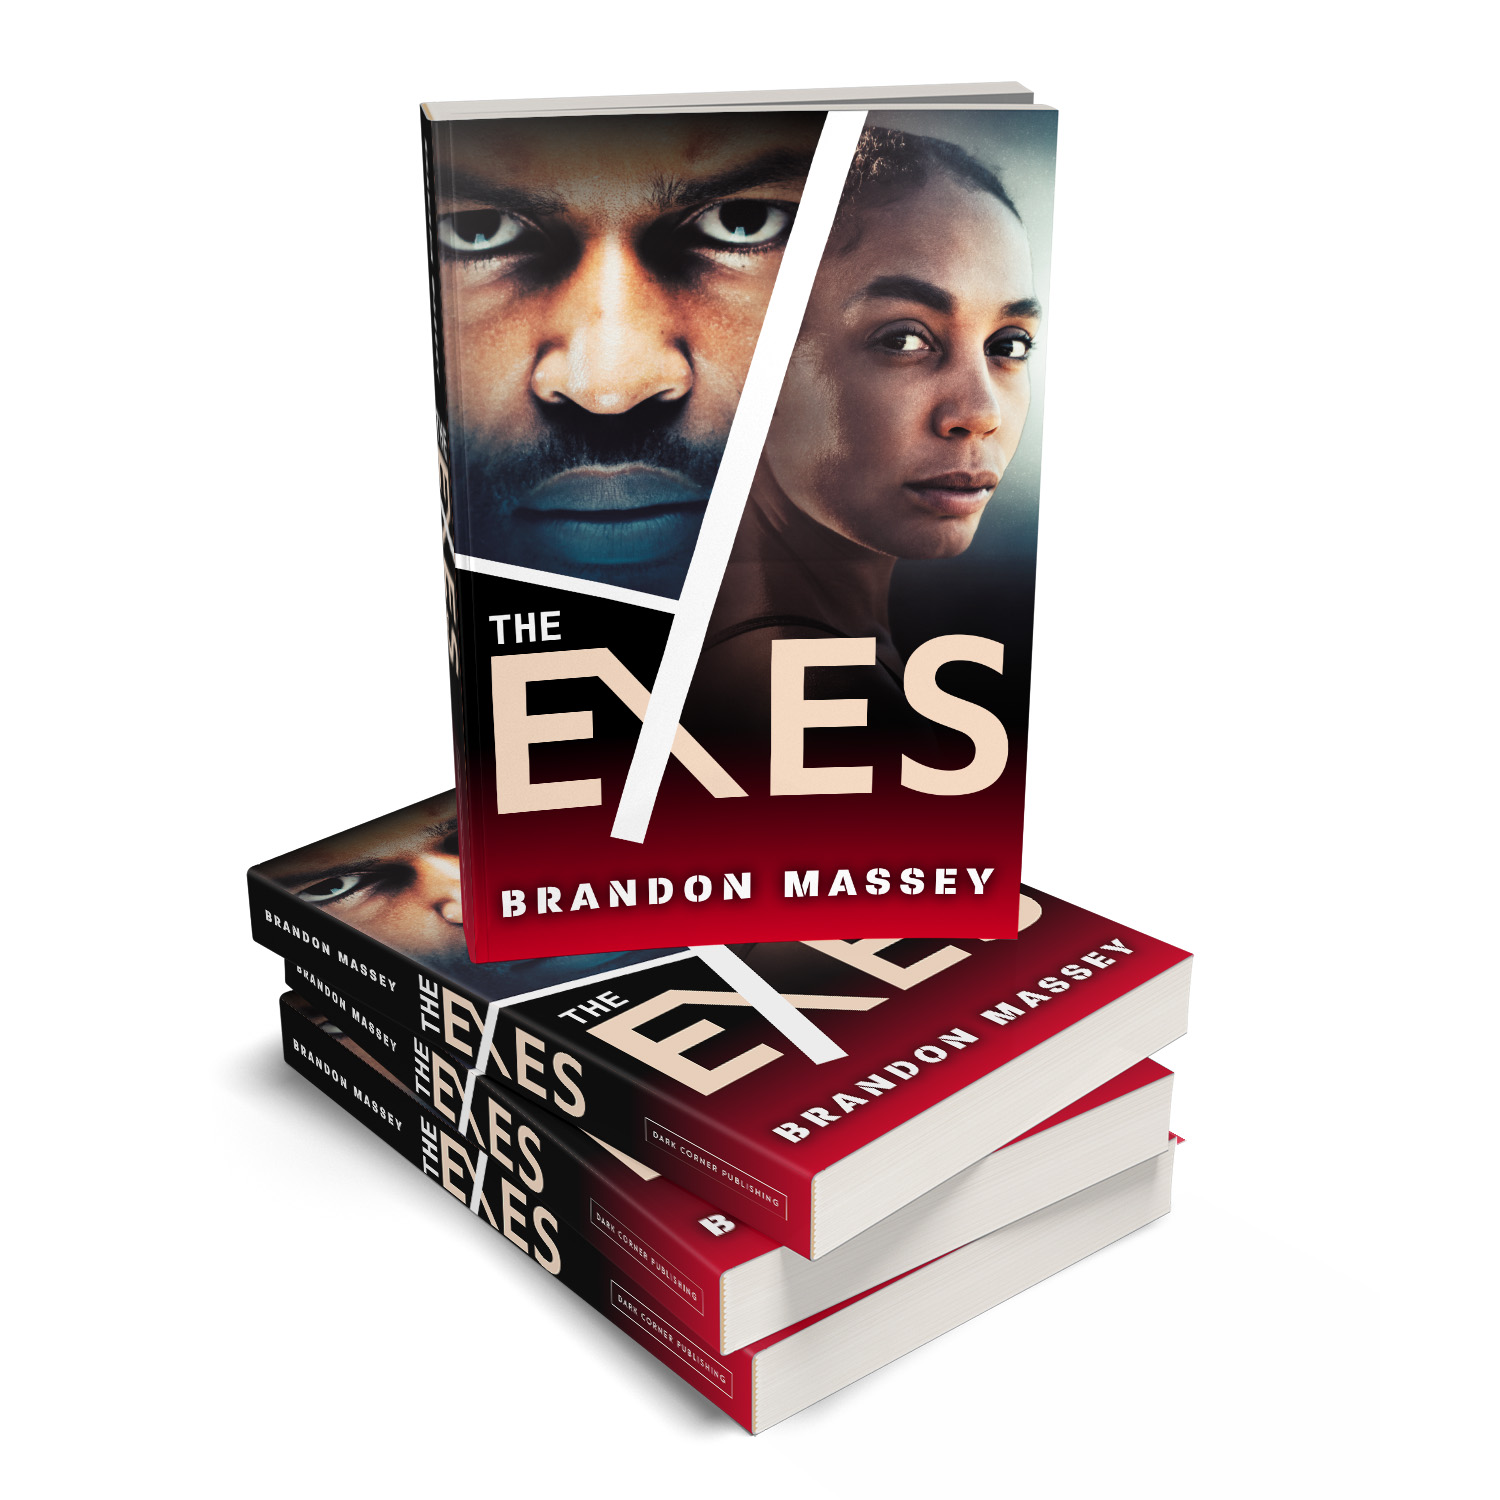 'The Exes' is a taut modern noir relationship thriller novel. The author is Brandon Massey. The book cover design & interior formatting are by Mark Thomas. To learn more about what Mark could do for your book, please visit coverness.com.